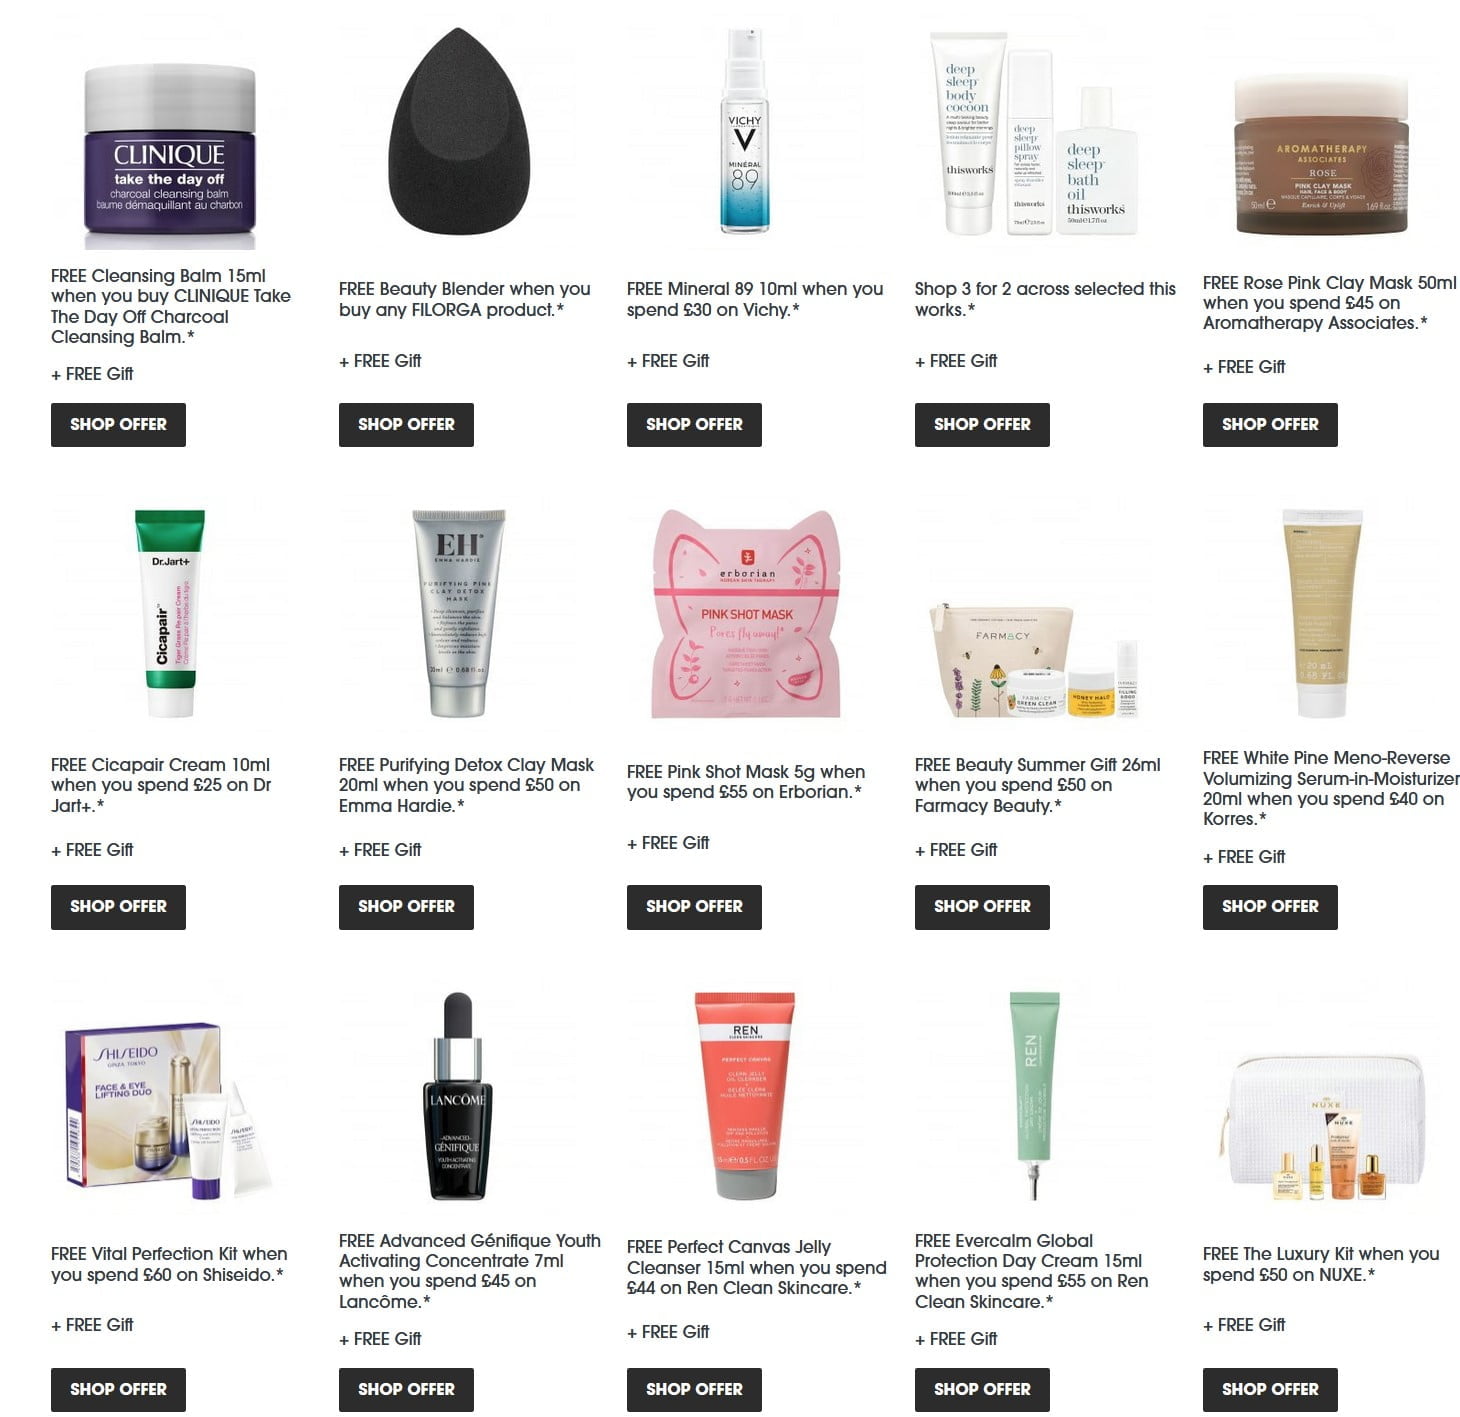 Gift with purchase offers at Sephora UK